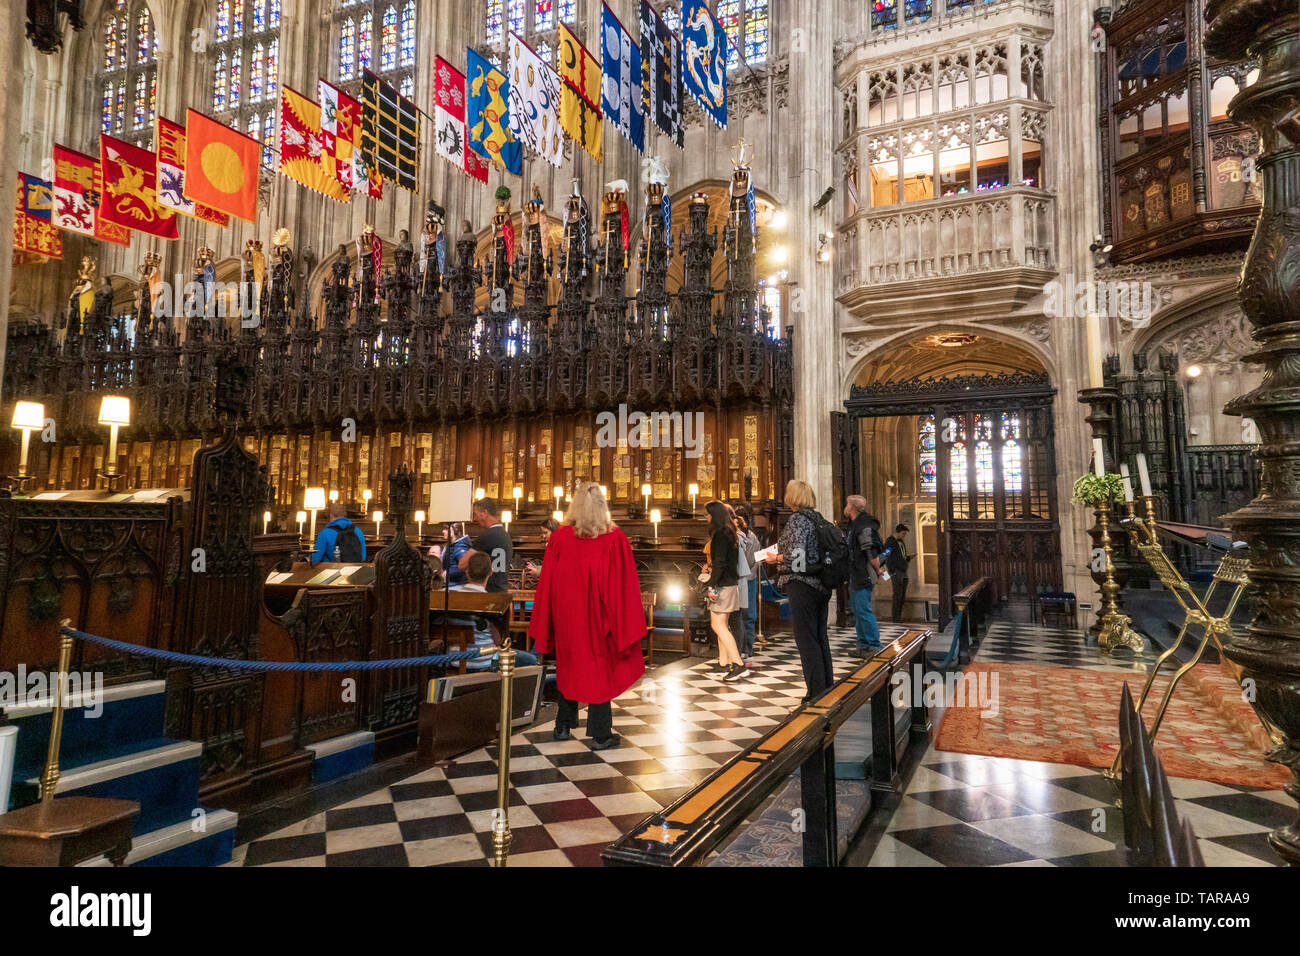 Windsor, UK - May 13, 2019: Interior of the medieval St. George's chapel the host of prince William and Meghan Markle wedding ceremony in windsor, England UK . Stock Photo